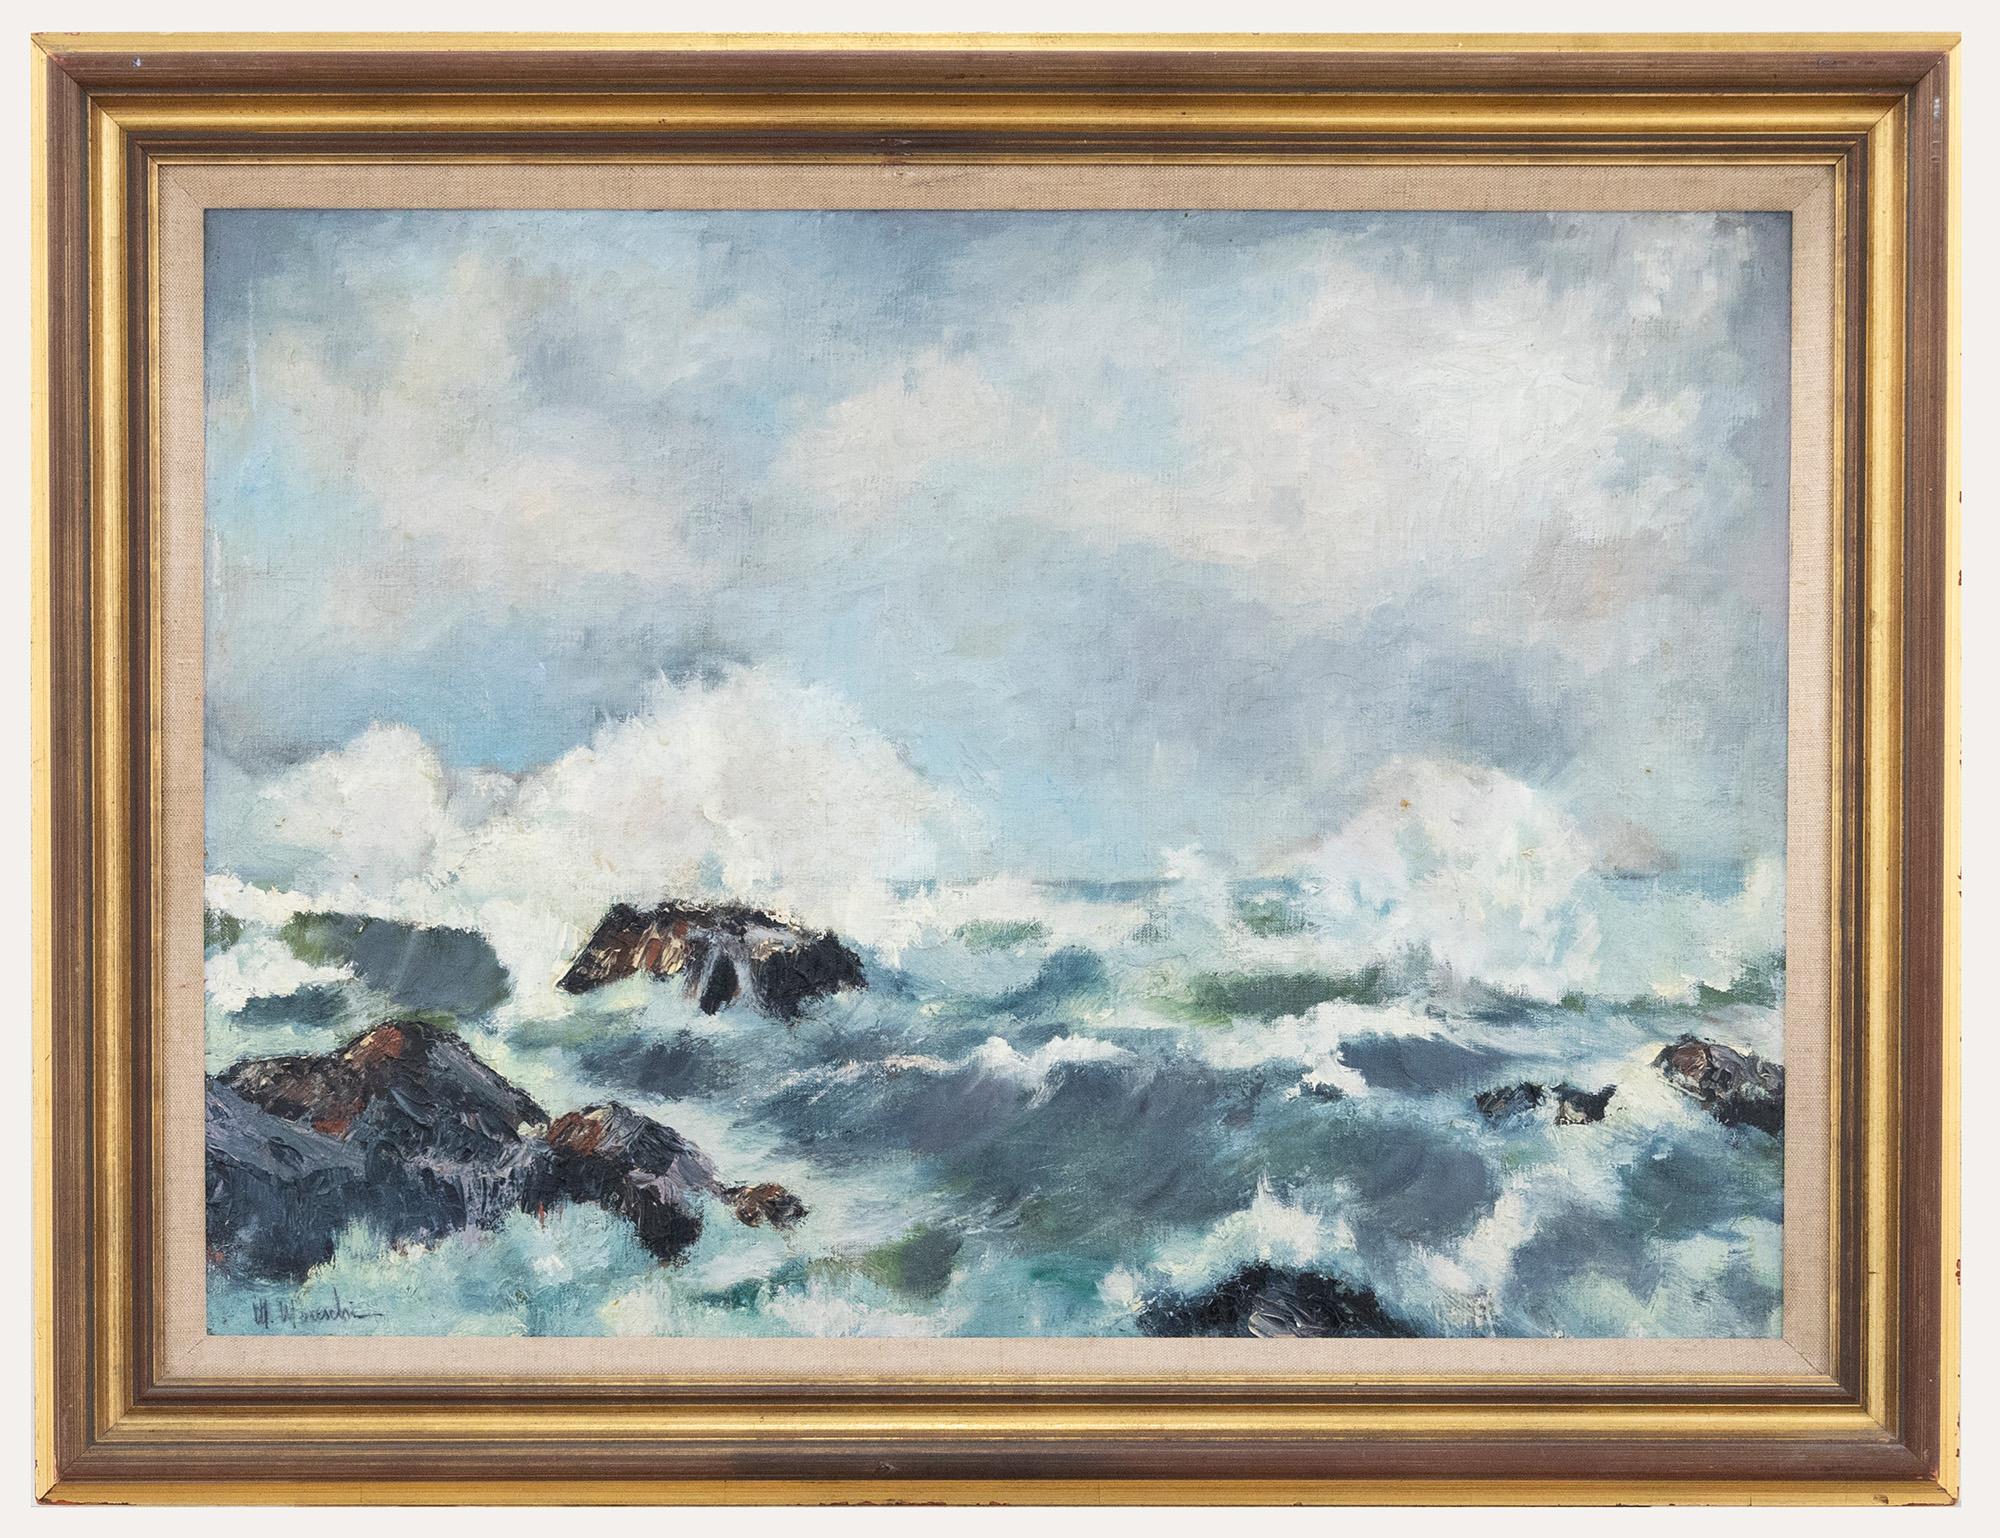 Unknown Figurative Painting - Maria Moreschi - Framed Mid 20th Century Oil, Stormy Seascape